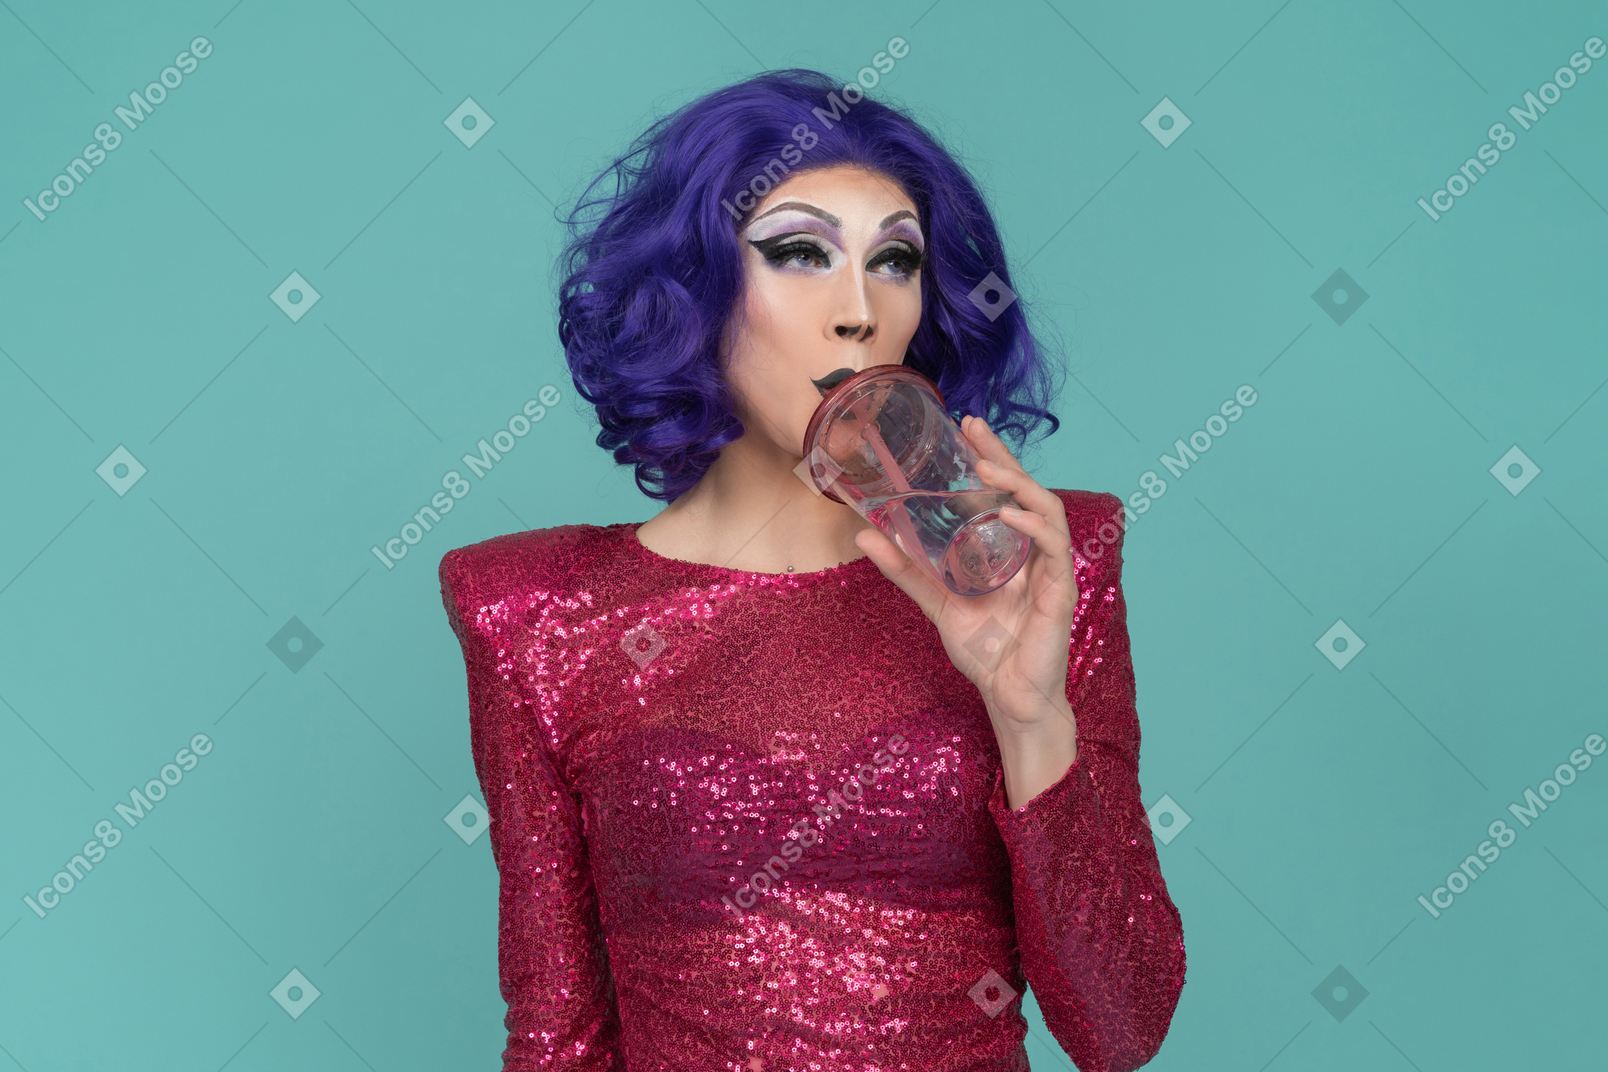 Drag queen in pink sequin dress having a drink from plastic cup